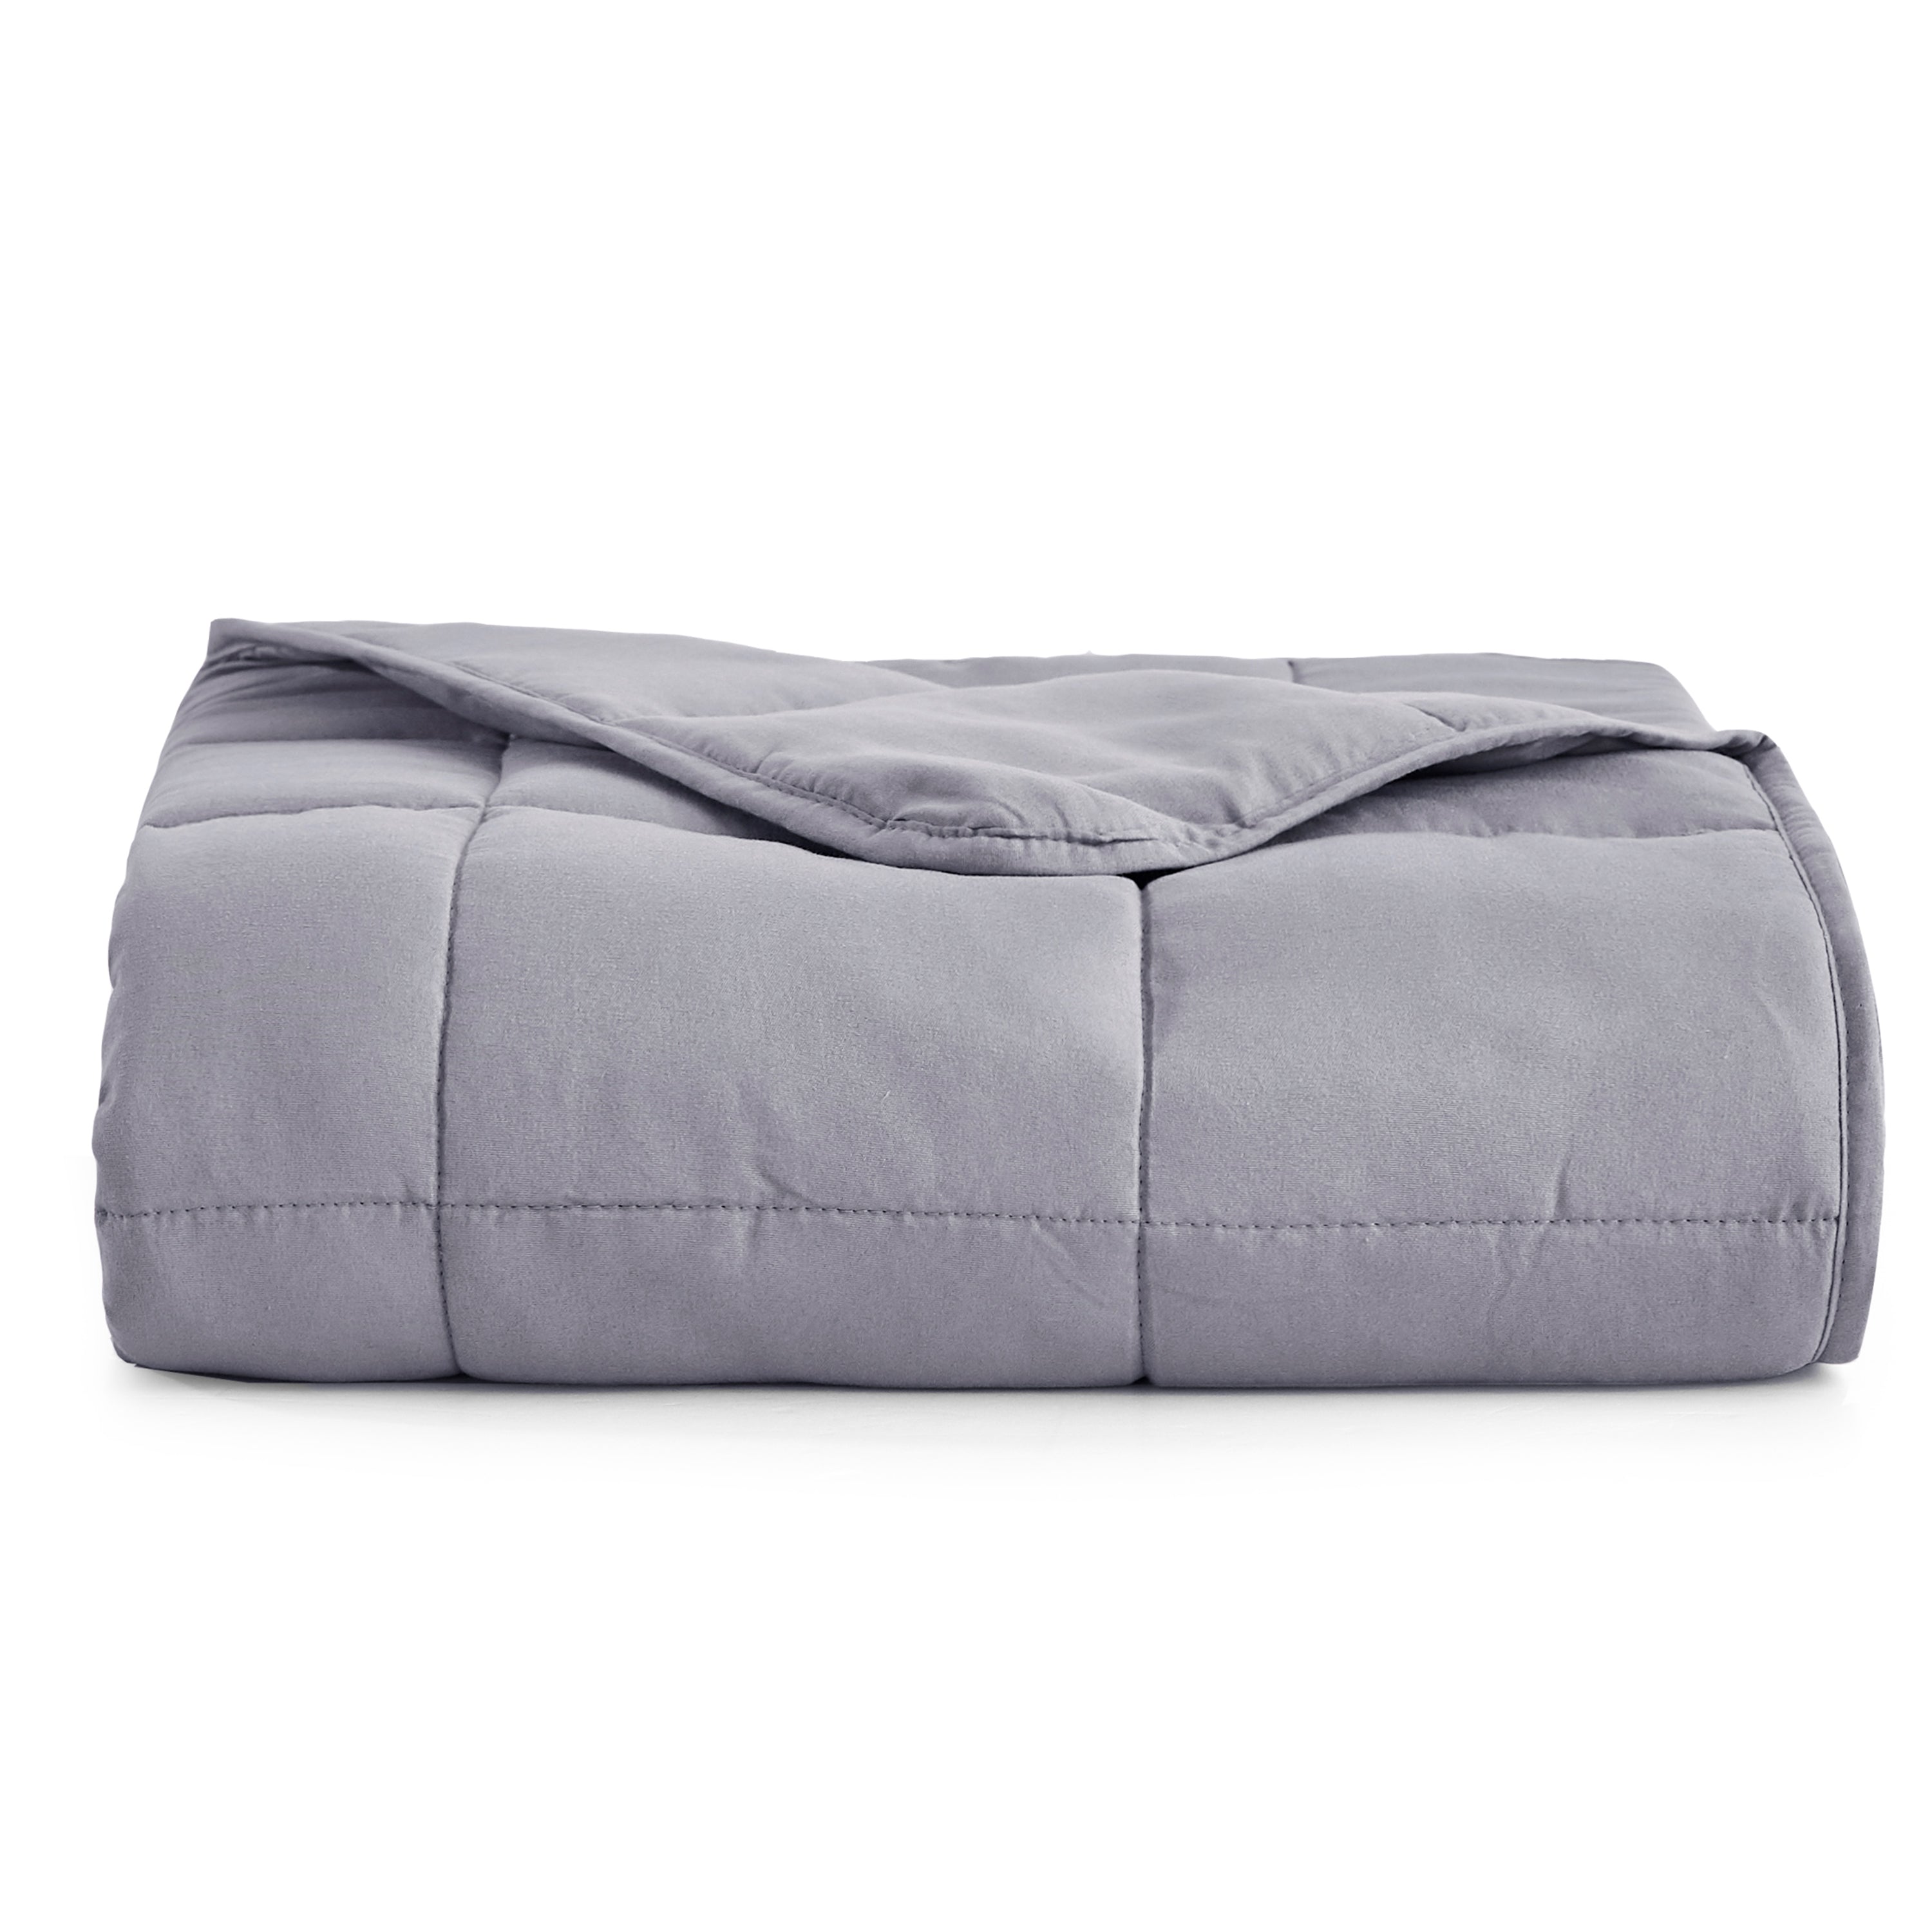 Classic Microfiber Weighted Blanket- 12 lb